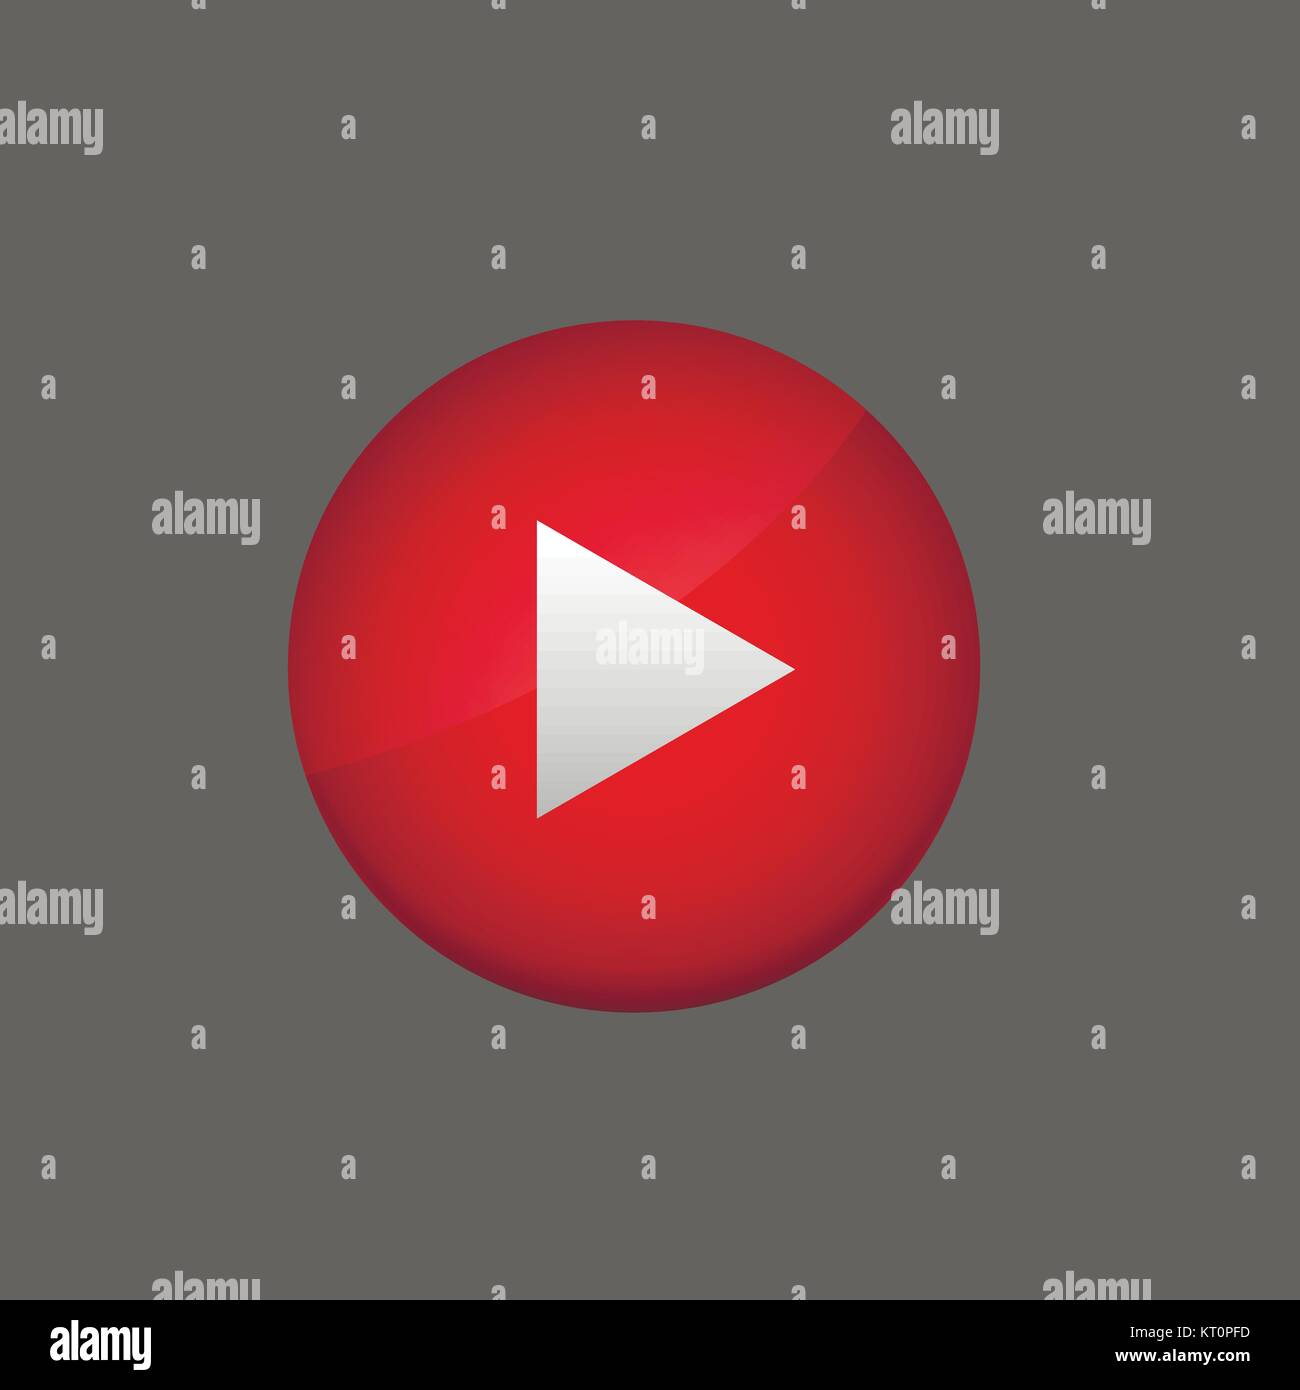 Play Now Button - Click on the Red Button Stock Vector - Illustration of  banner, movie: 182469528